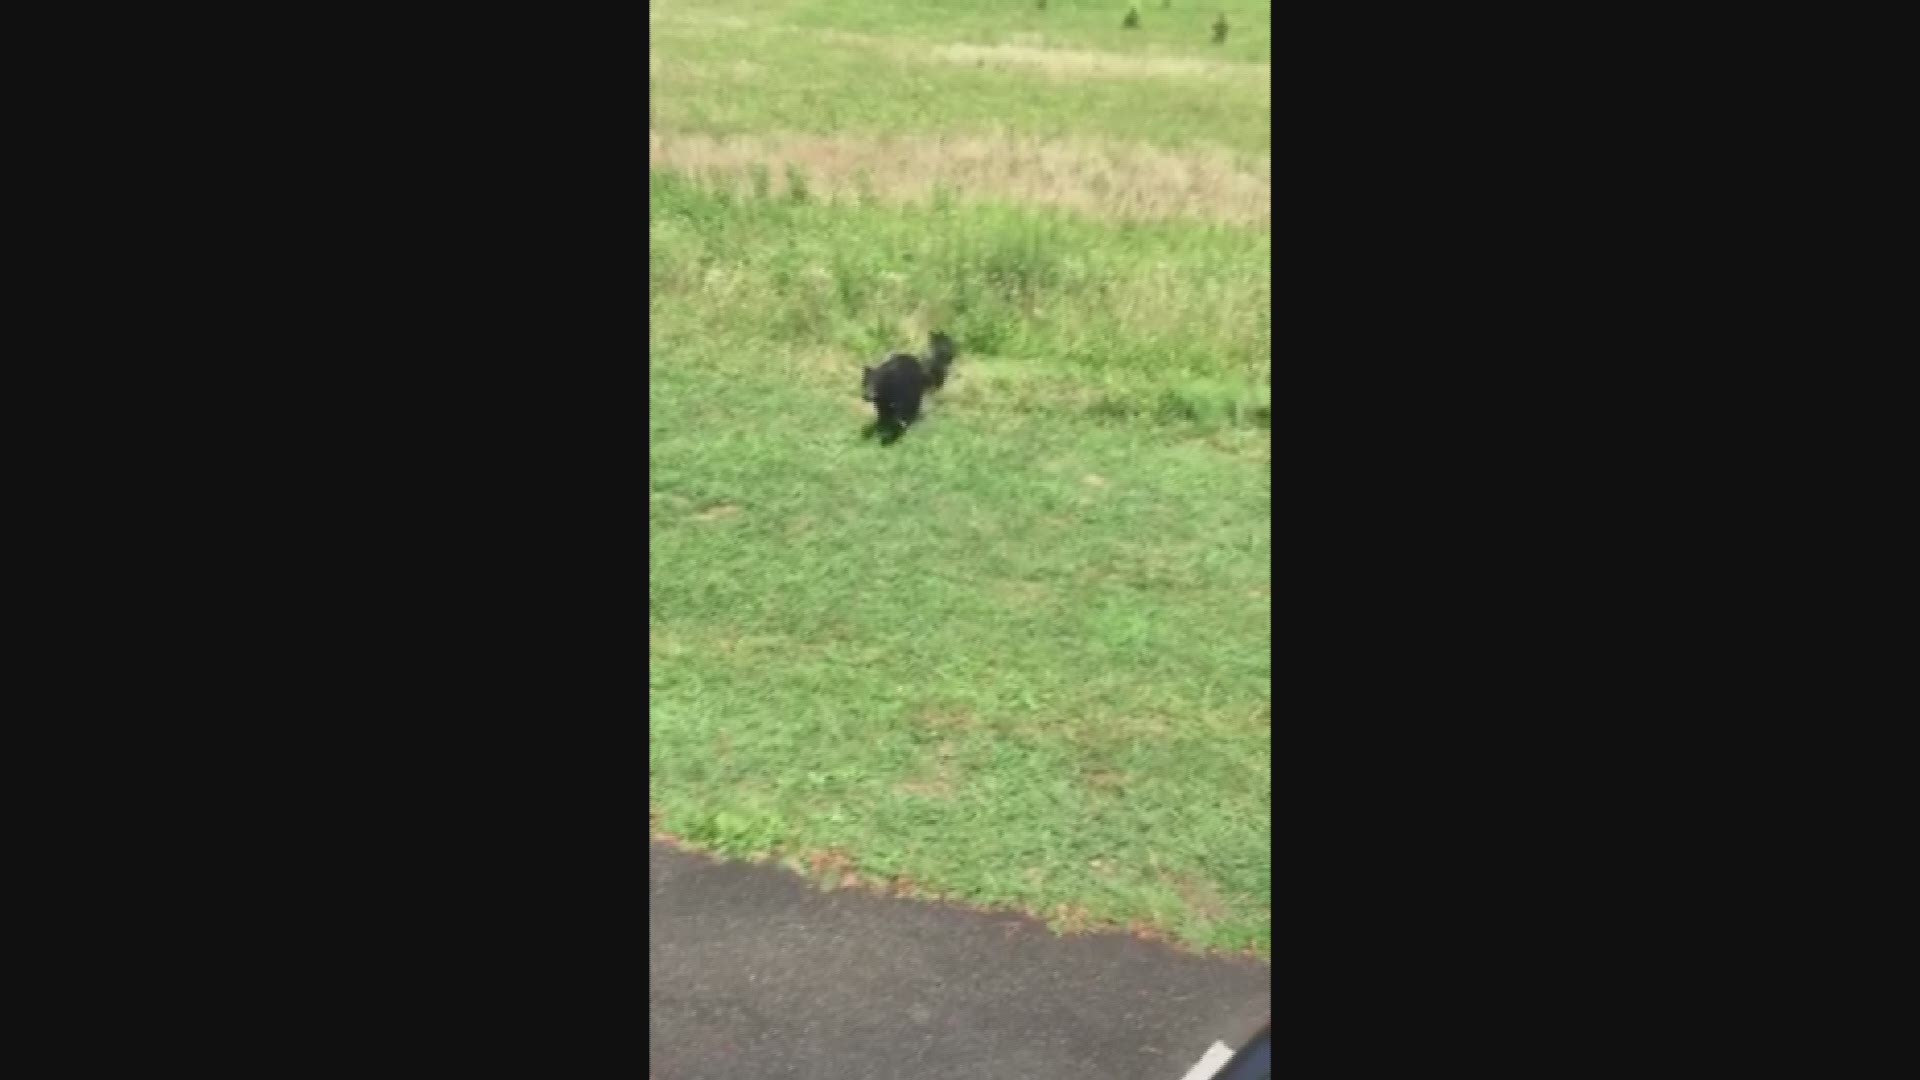 On Saturday, a momma bear charged a man at Cades Cove after he repeatedly tried to approach her cubs. Video submitted by 10News viewer Paige Marple.